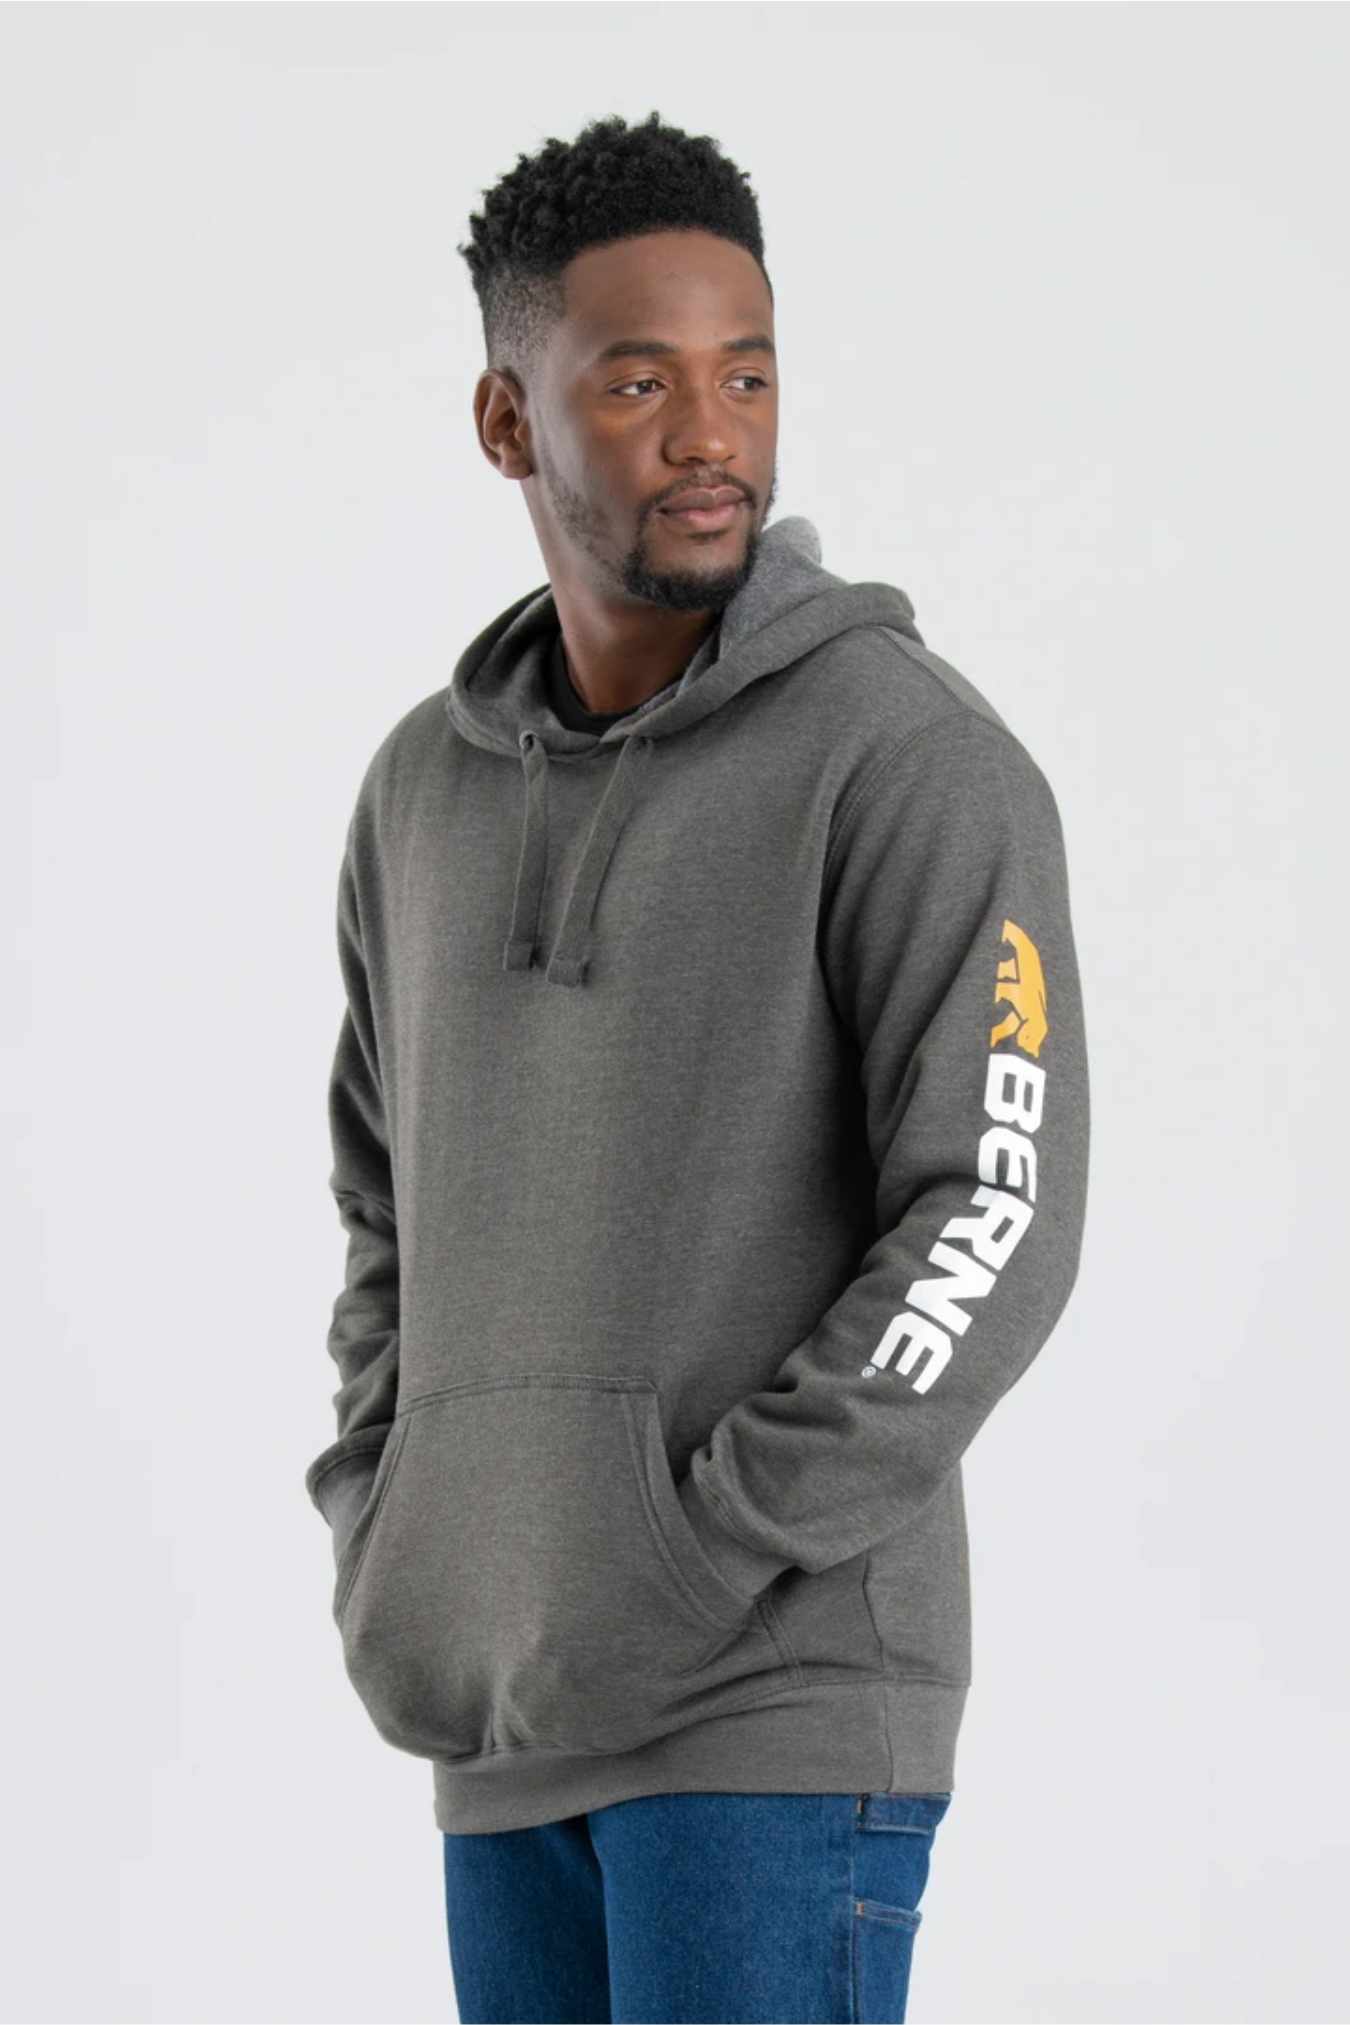 Berne - Signature Sleeve Hooded Pullover - SP401-402